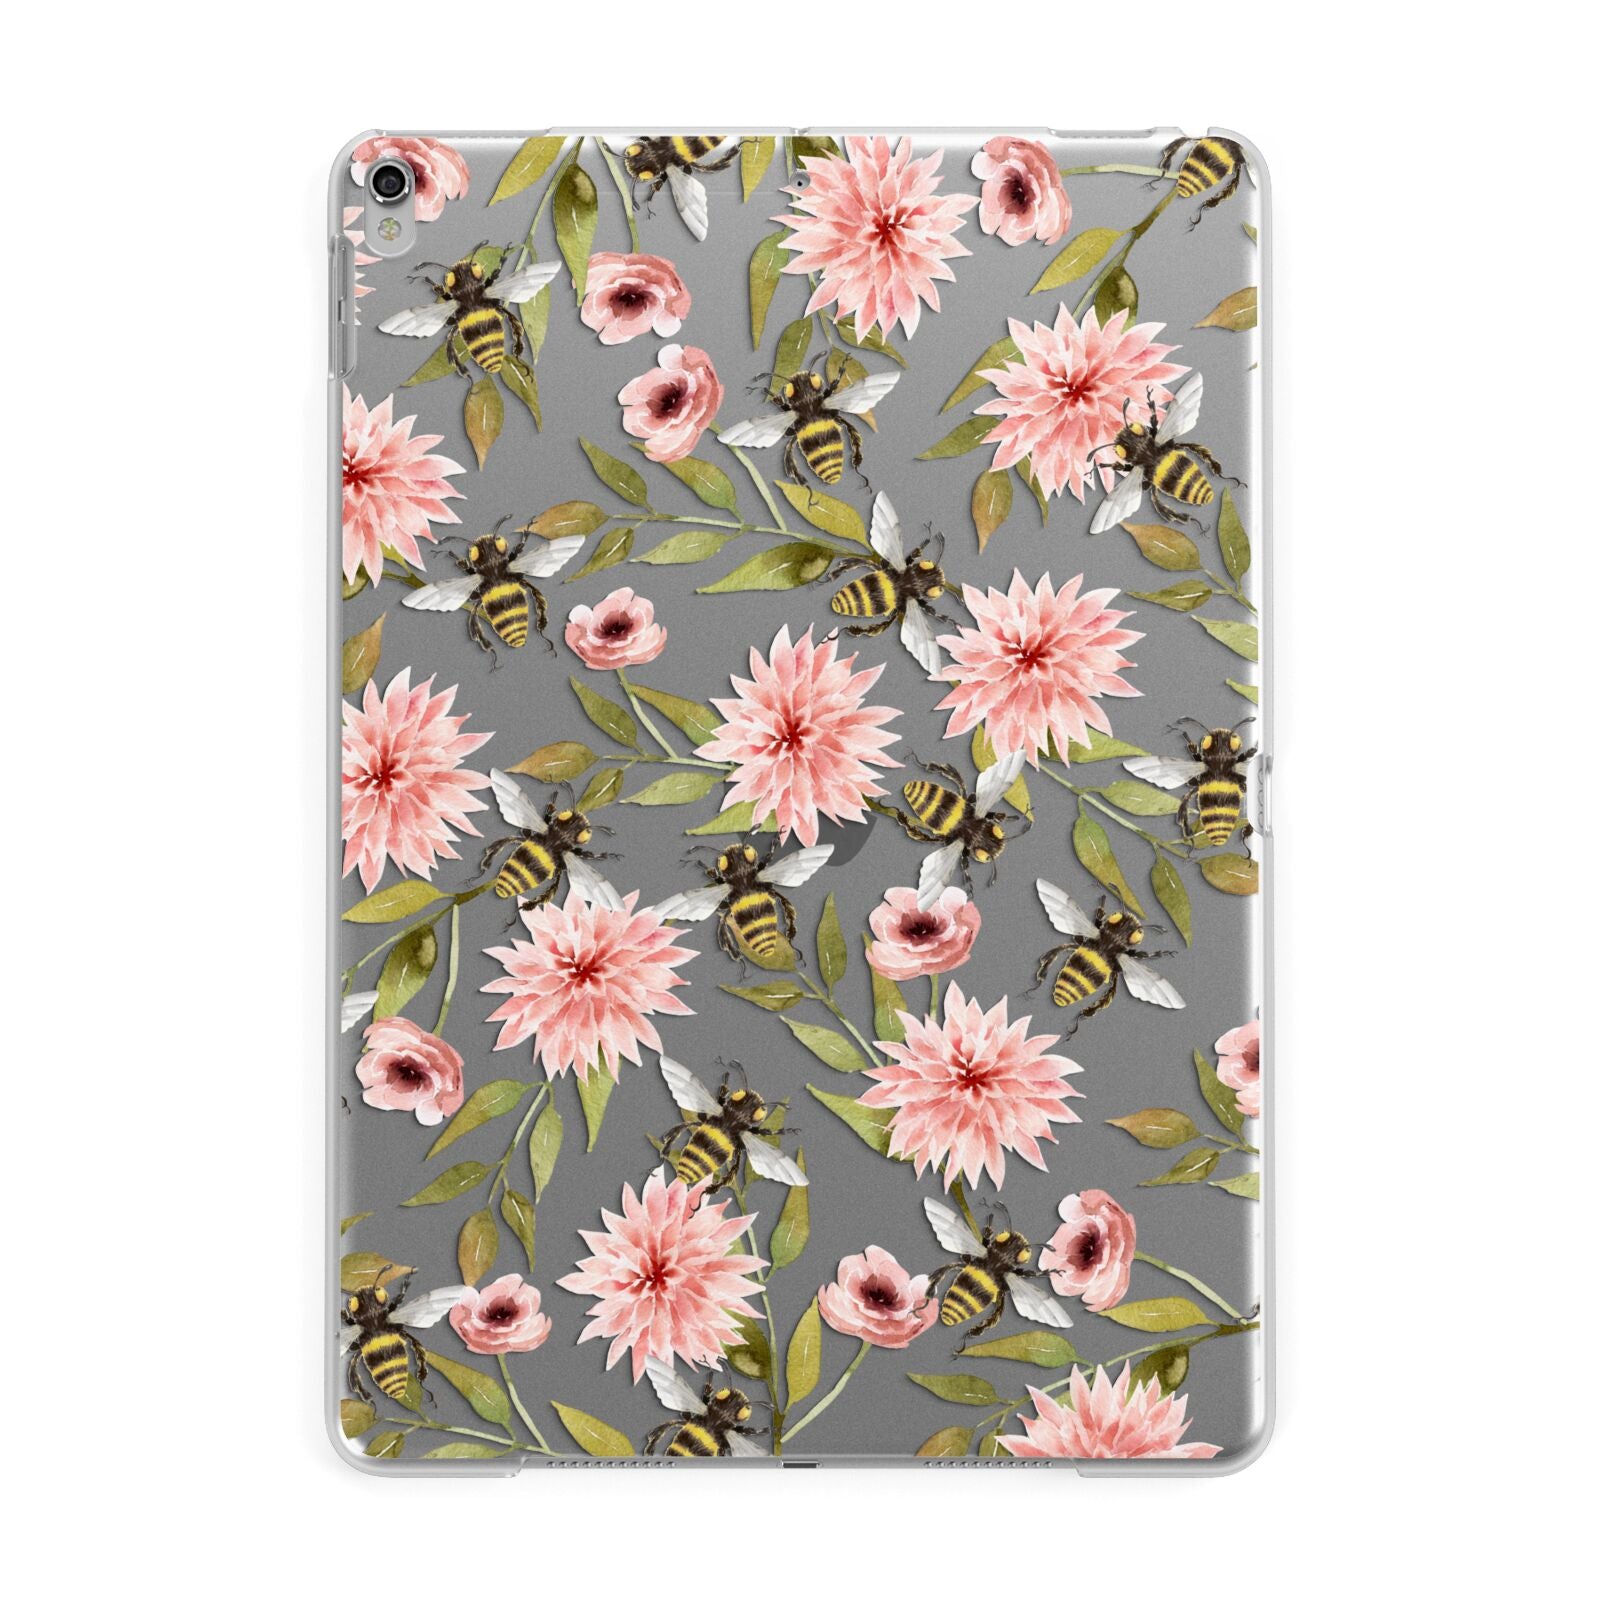 Clear Pink Flowers and Bees Apple iPad Silver Case